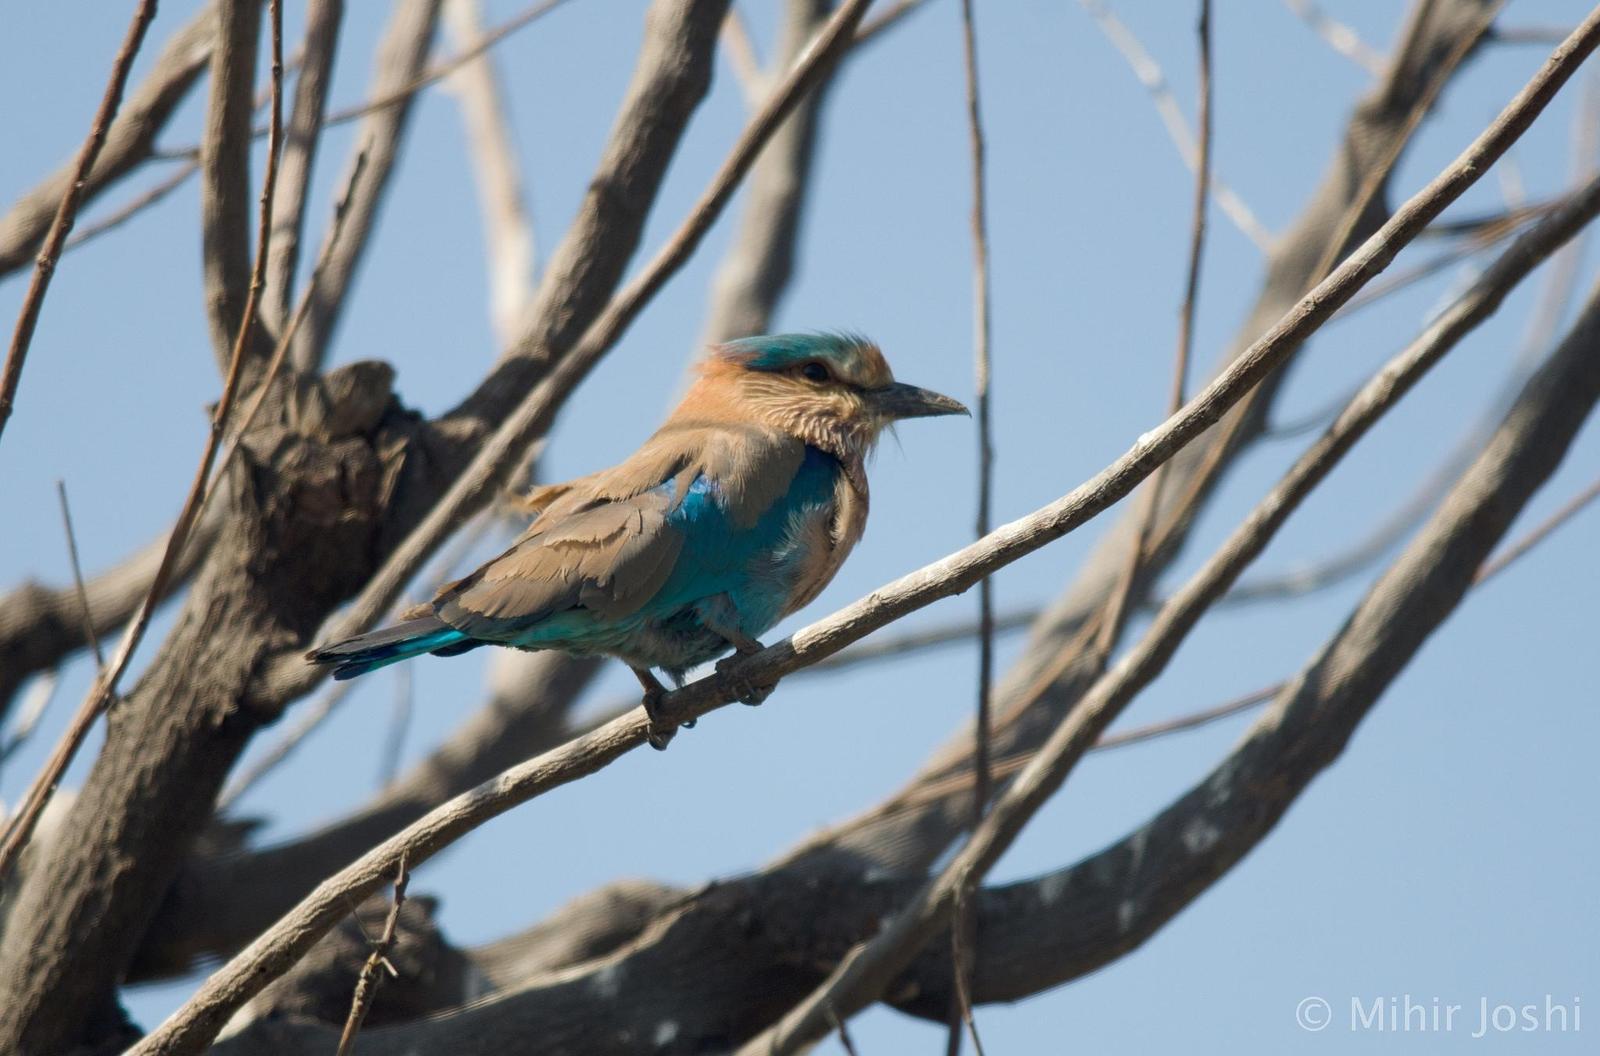 Indian/Indochinese Roller Photo by Mihir Joshi